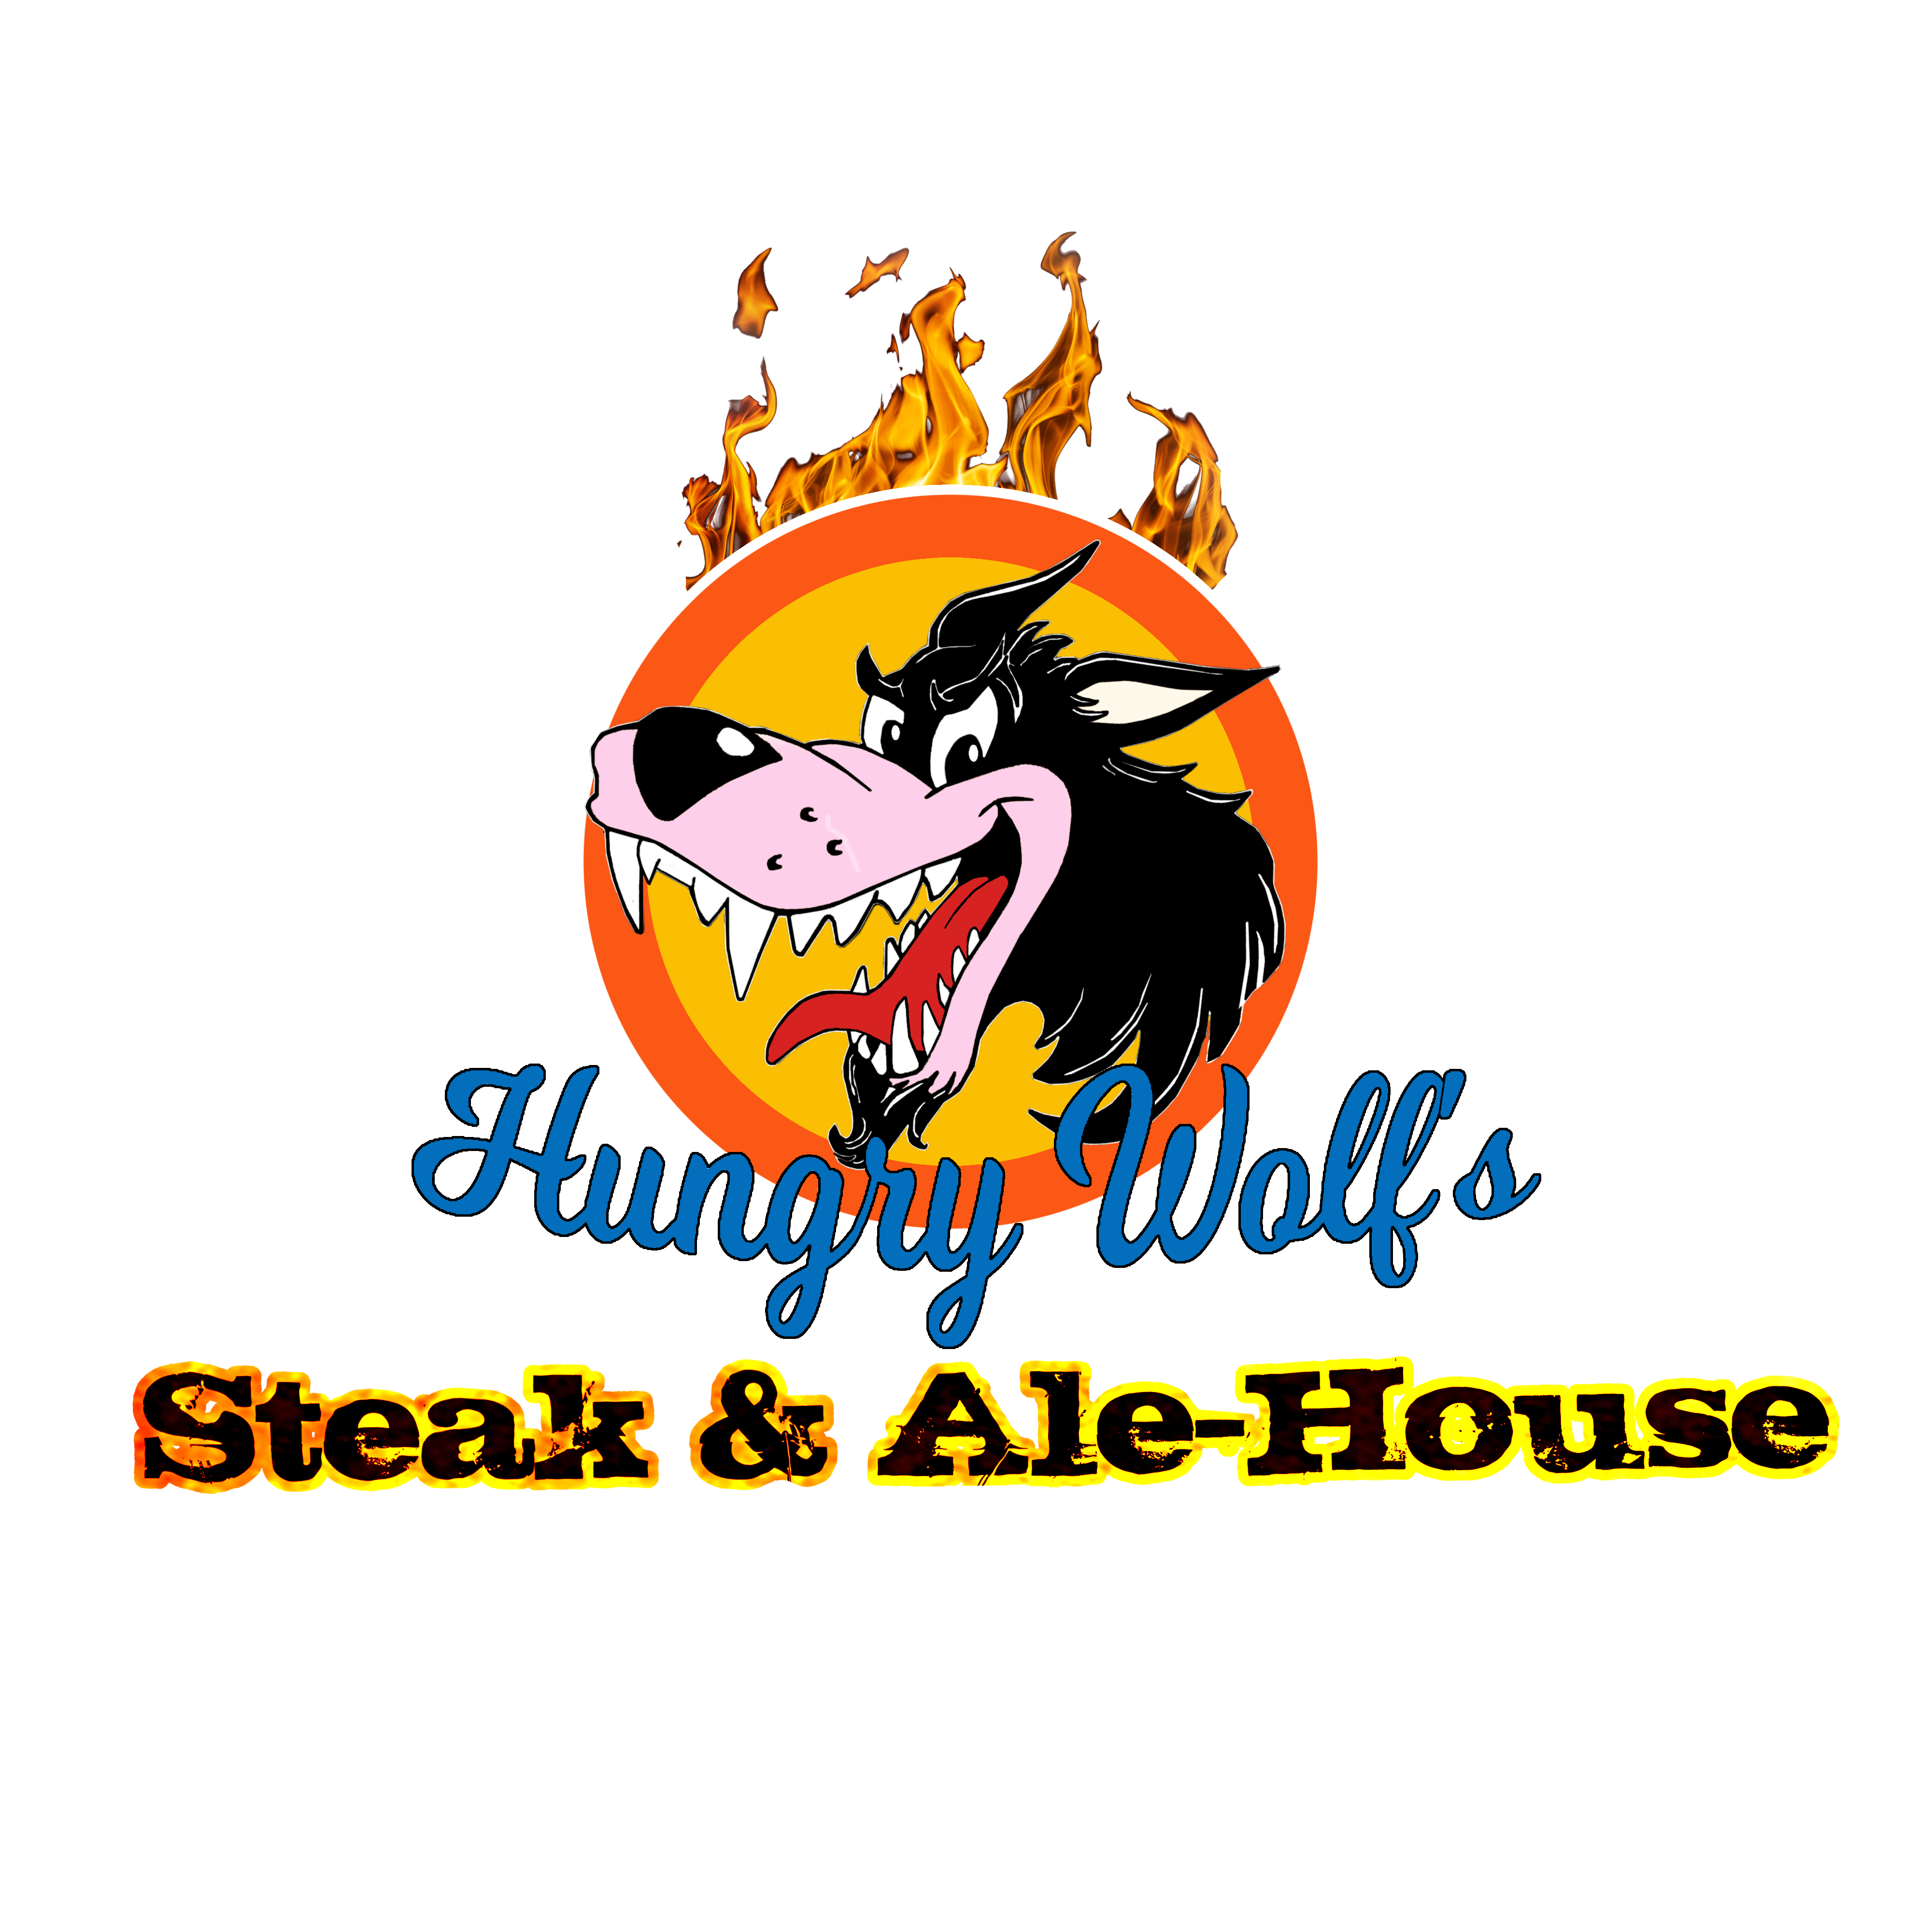 Seafood clipart surf and turf. Hungry wolfs steak ale